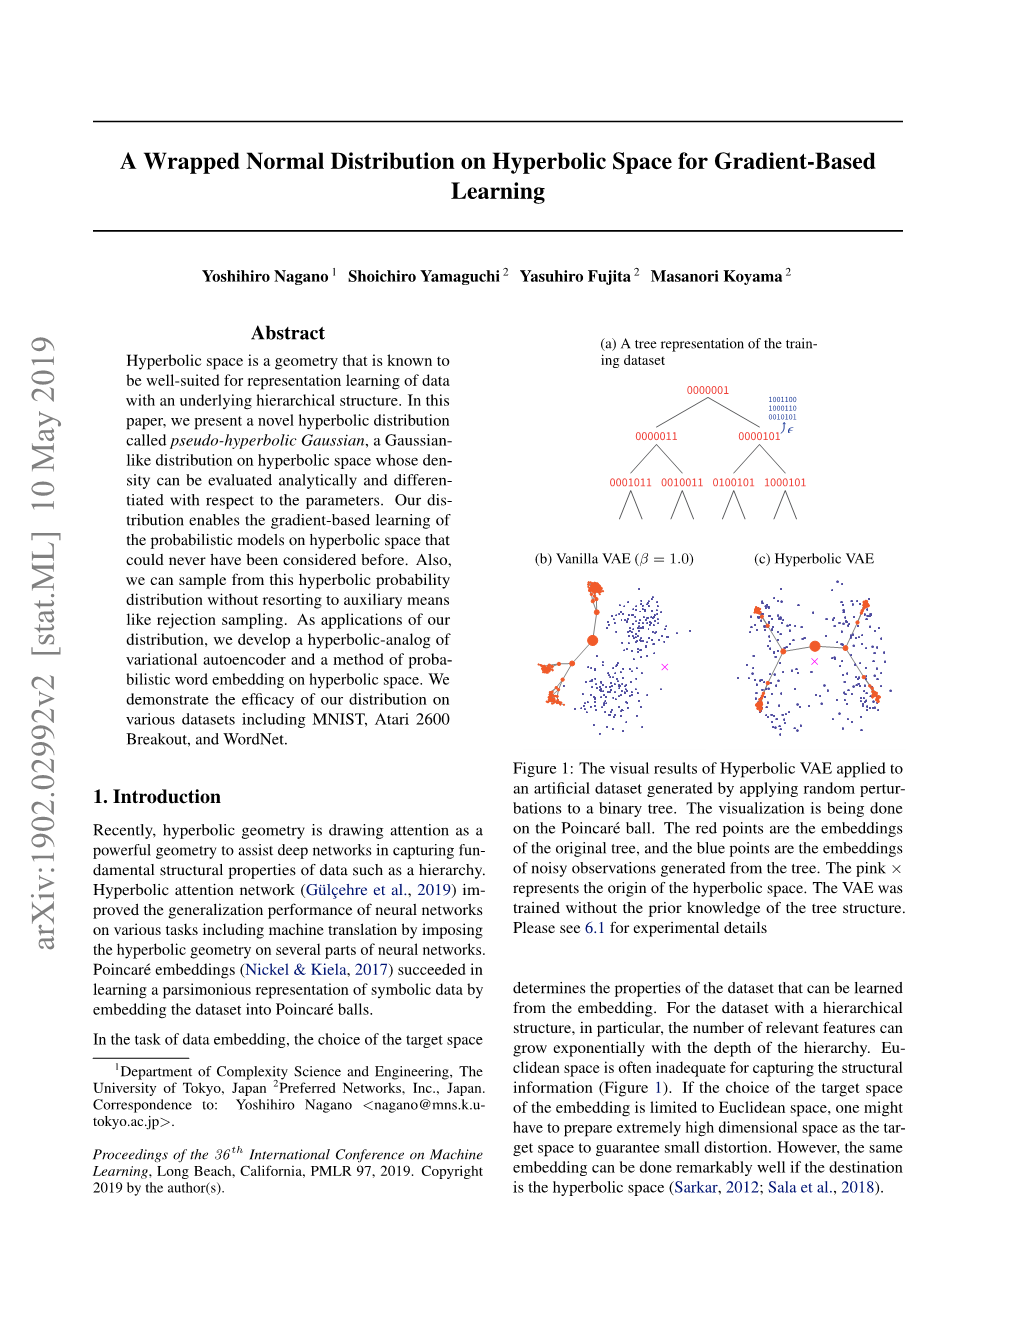 A Wrapped Normal Distribution on Hyperbolic Space for Gradient-Based Learning